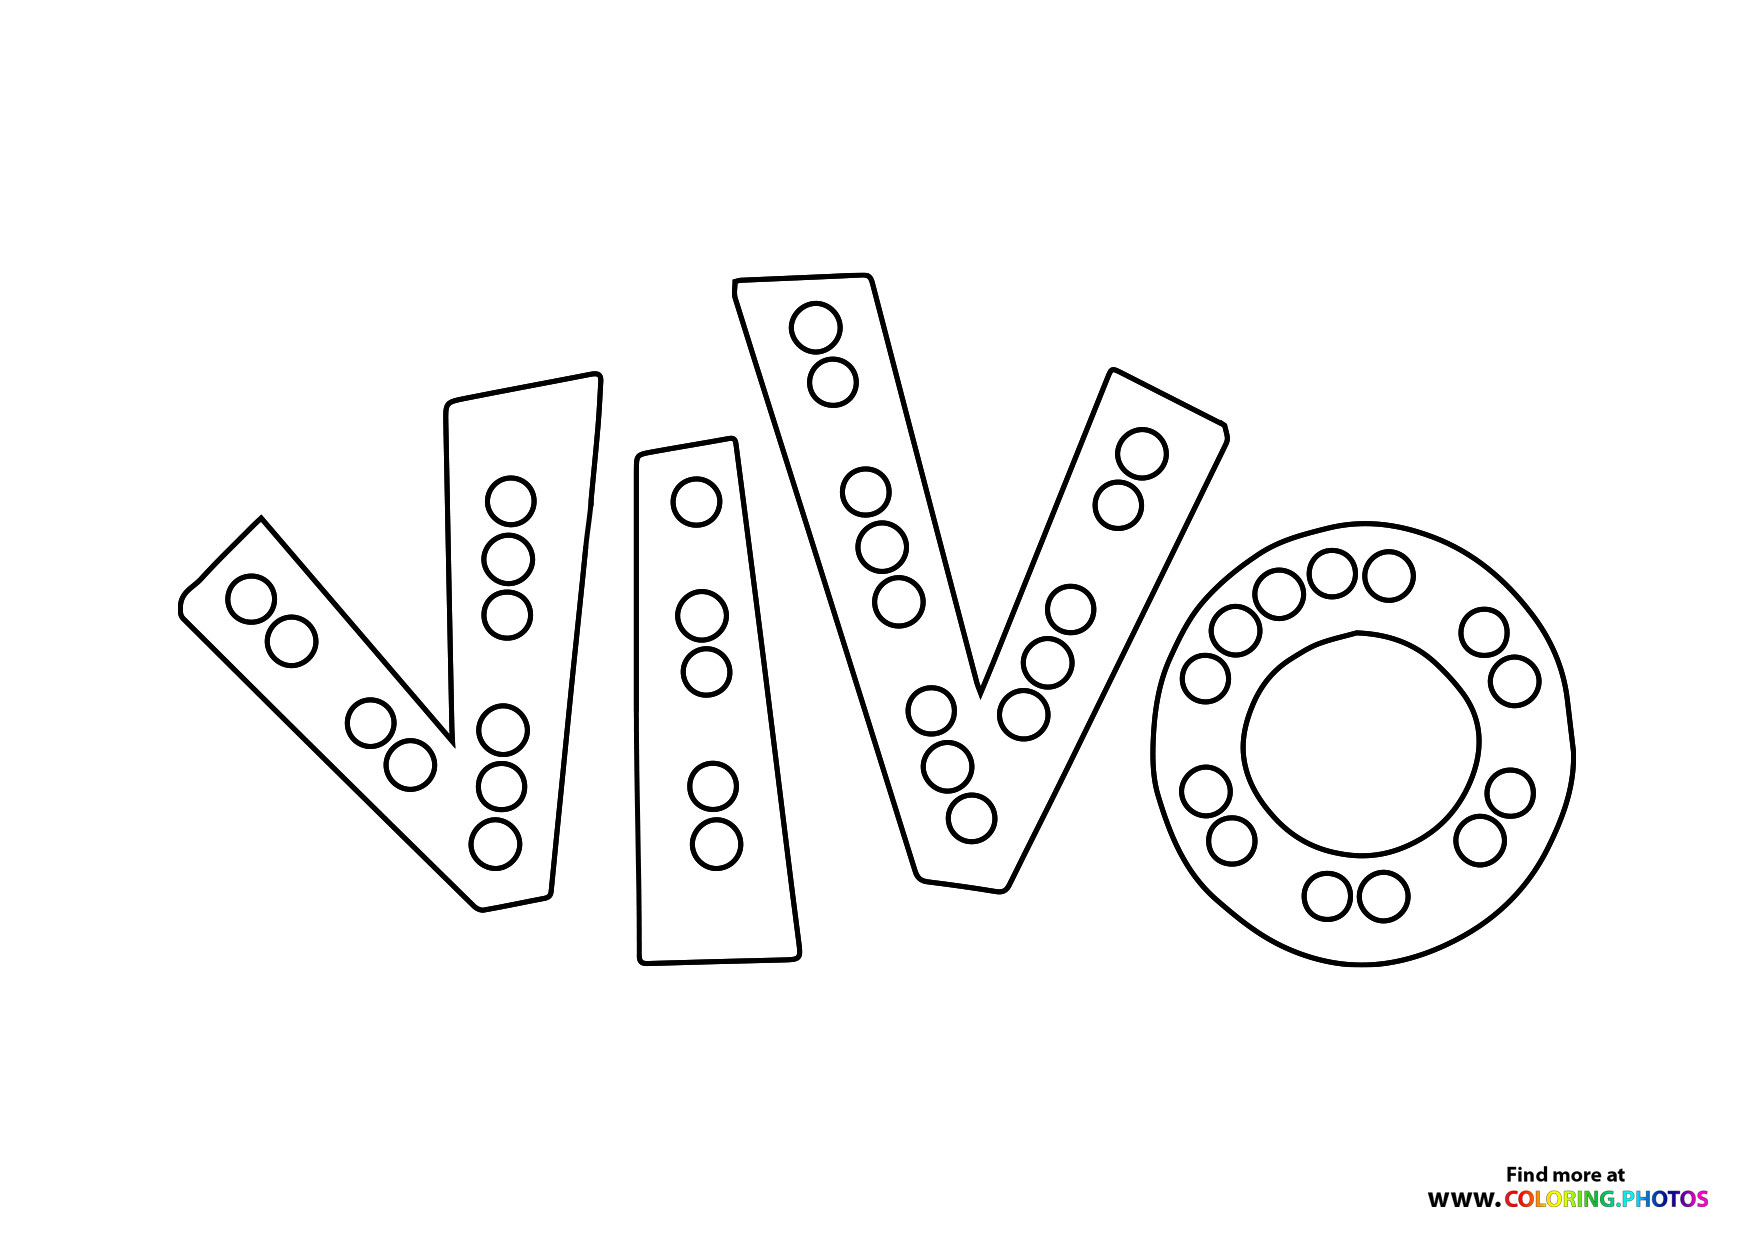 Netflix Vivo coloring pages | Free & easy print or download coloring sheets